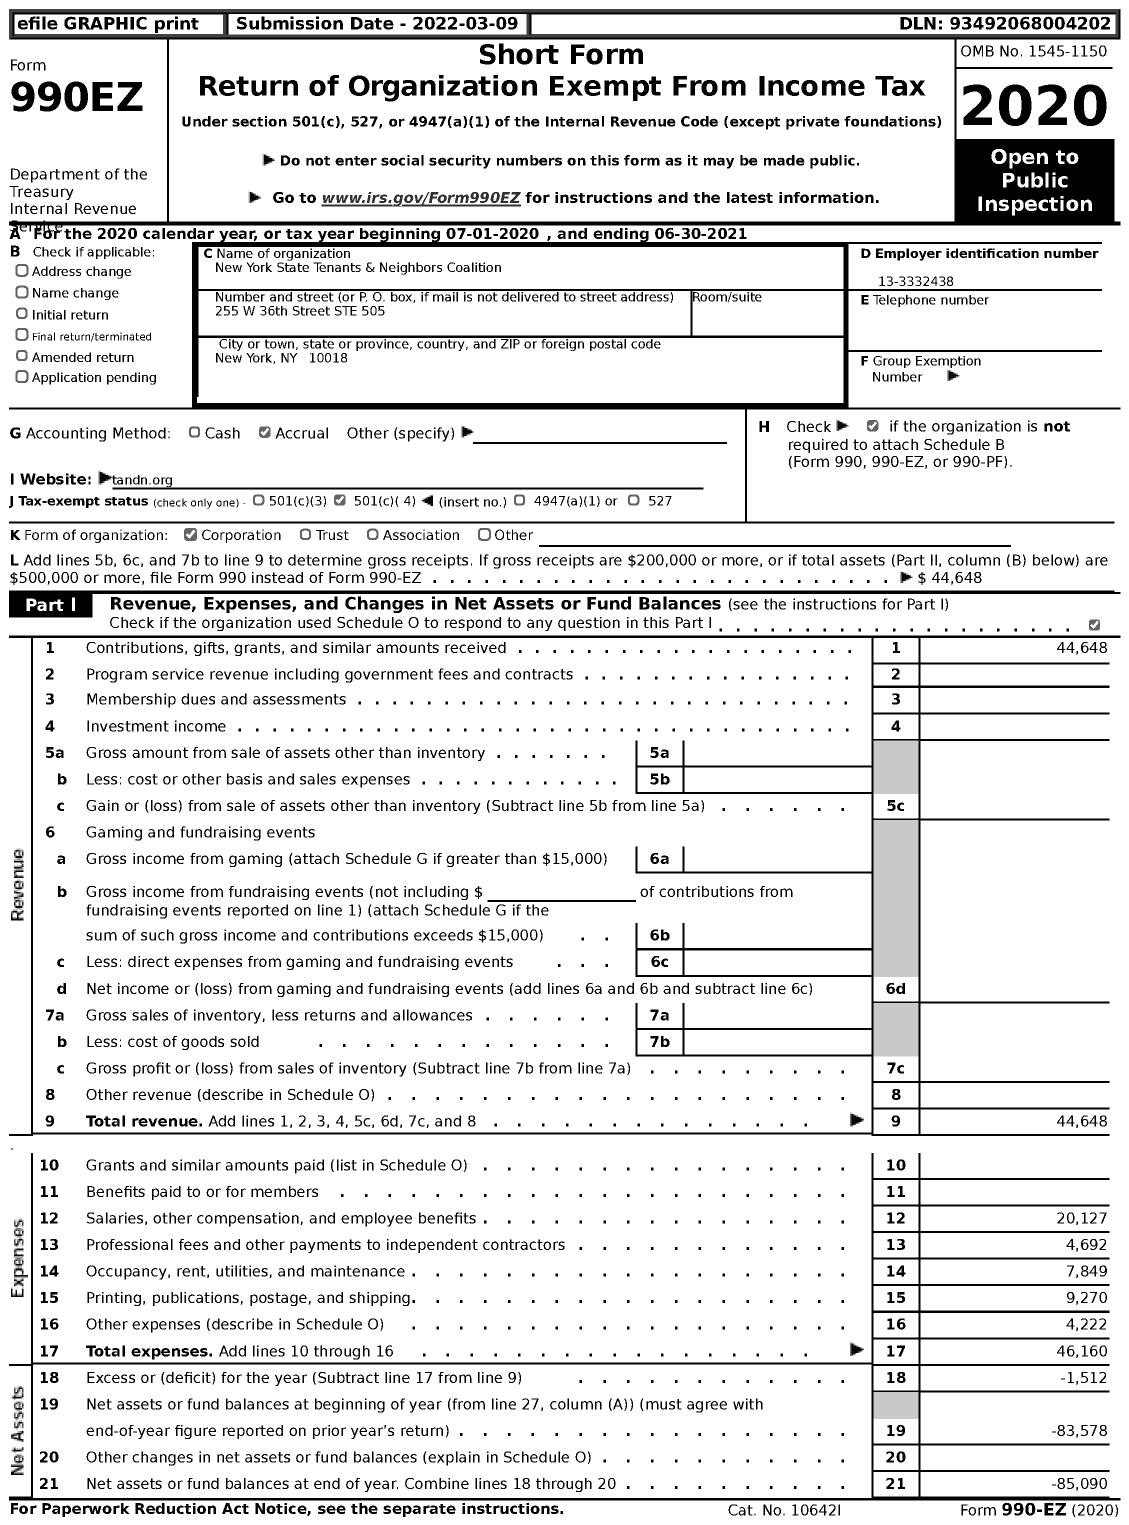 Image of first page of 2020 Form 990EZ for New York State Tenants & Neighbors Coalition